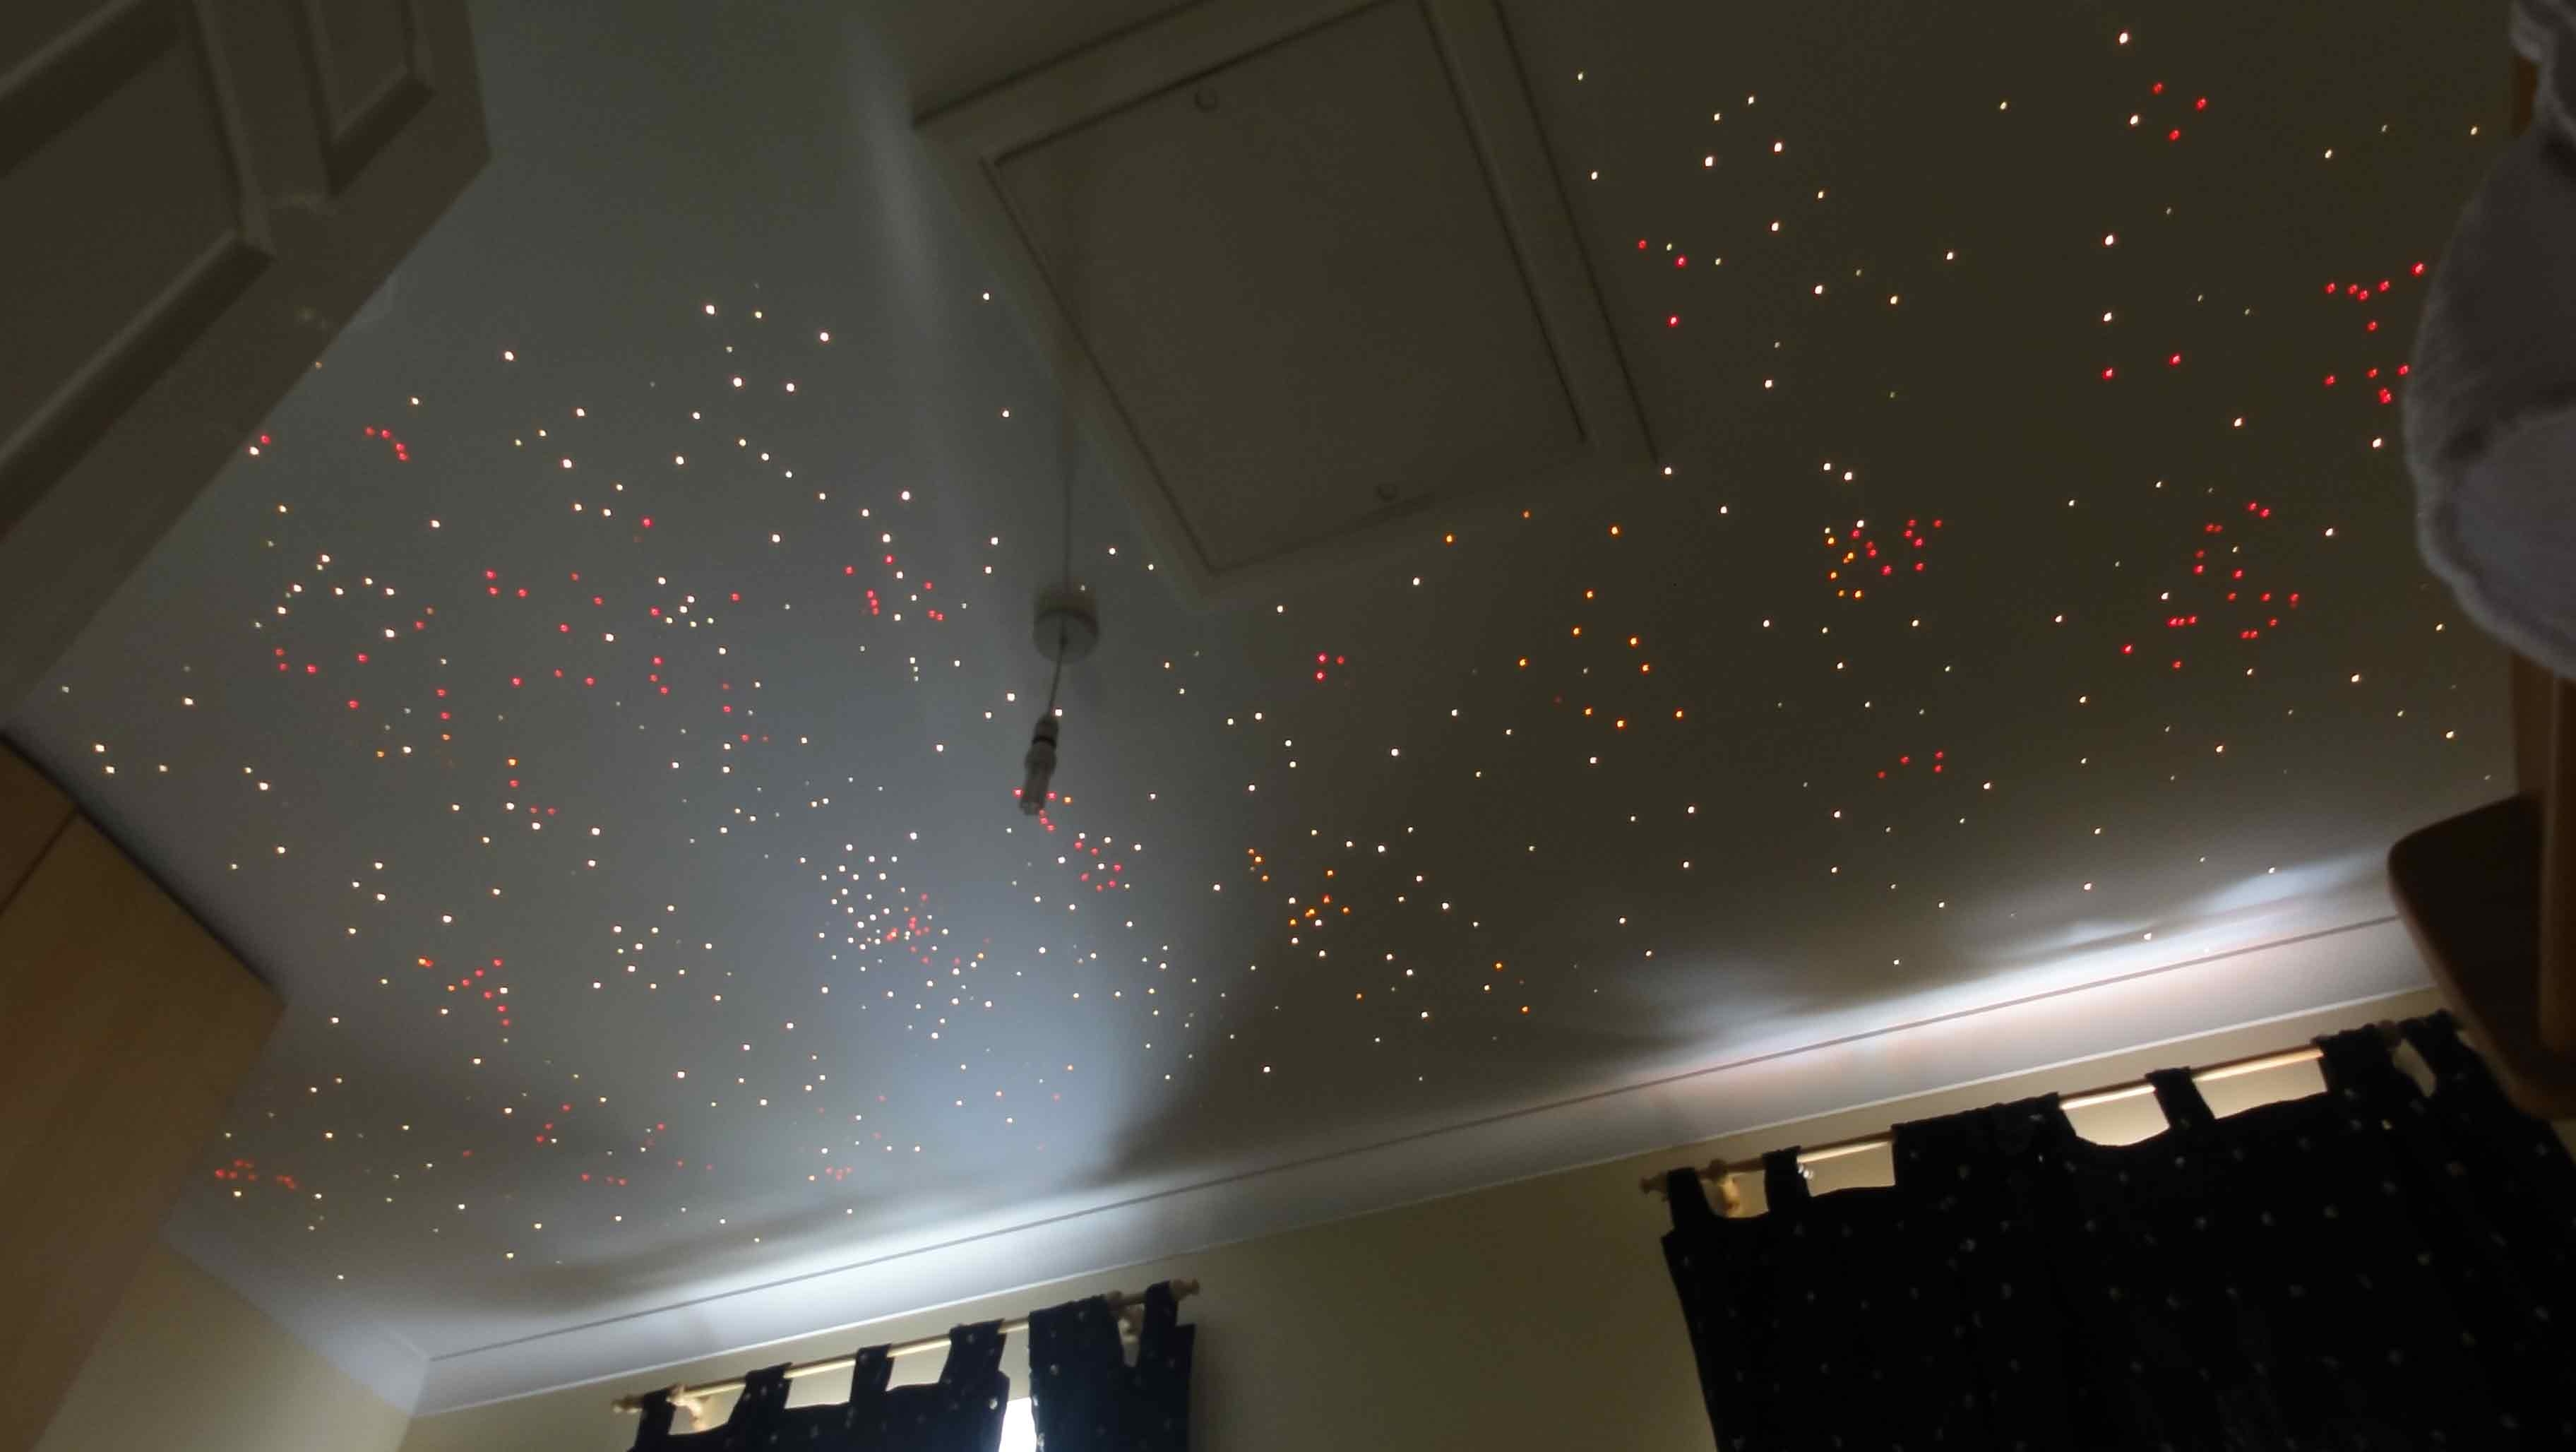 Fibre Optic Lighting Kit For Ceilingstar ceiling with twin fibre optic circuits